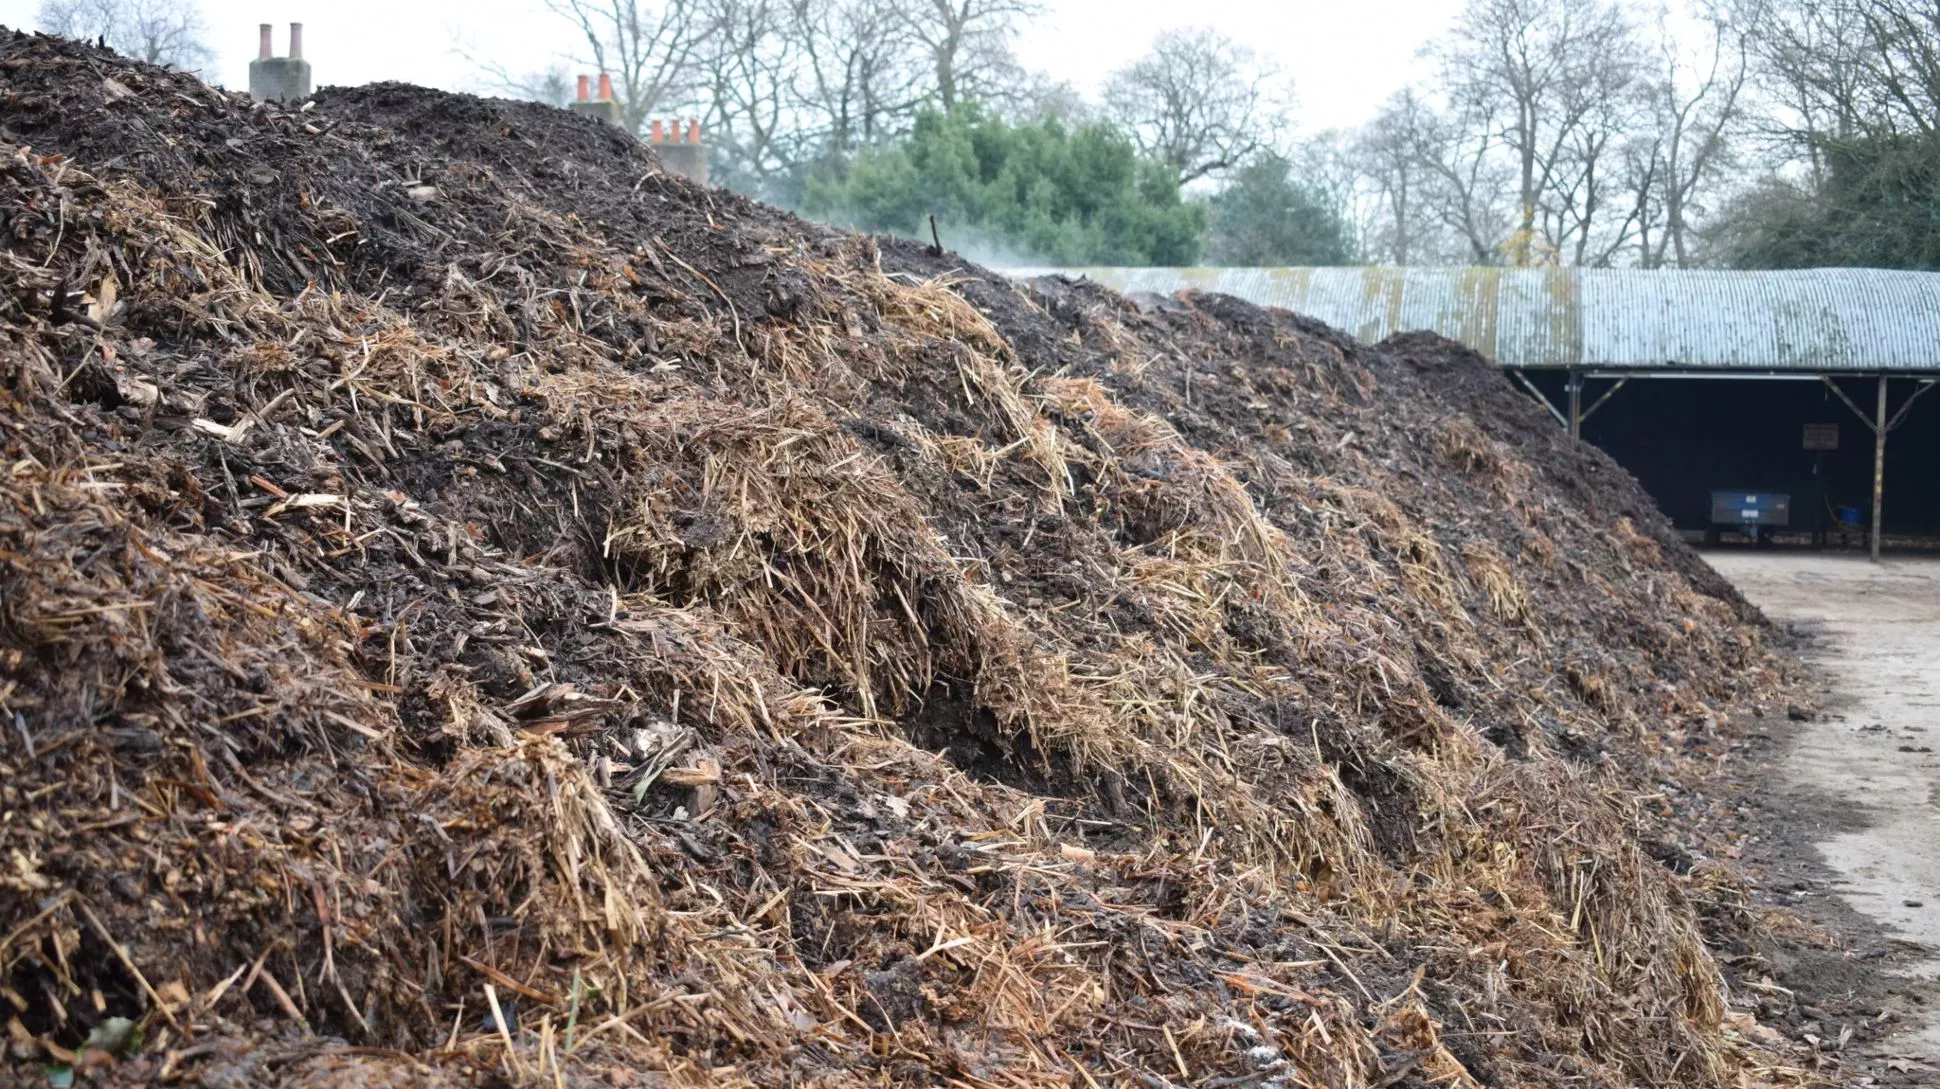 Compost being made in the Stable Yard at Kew Gardens